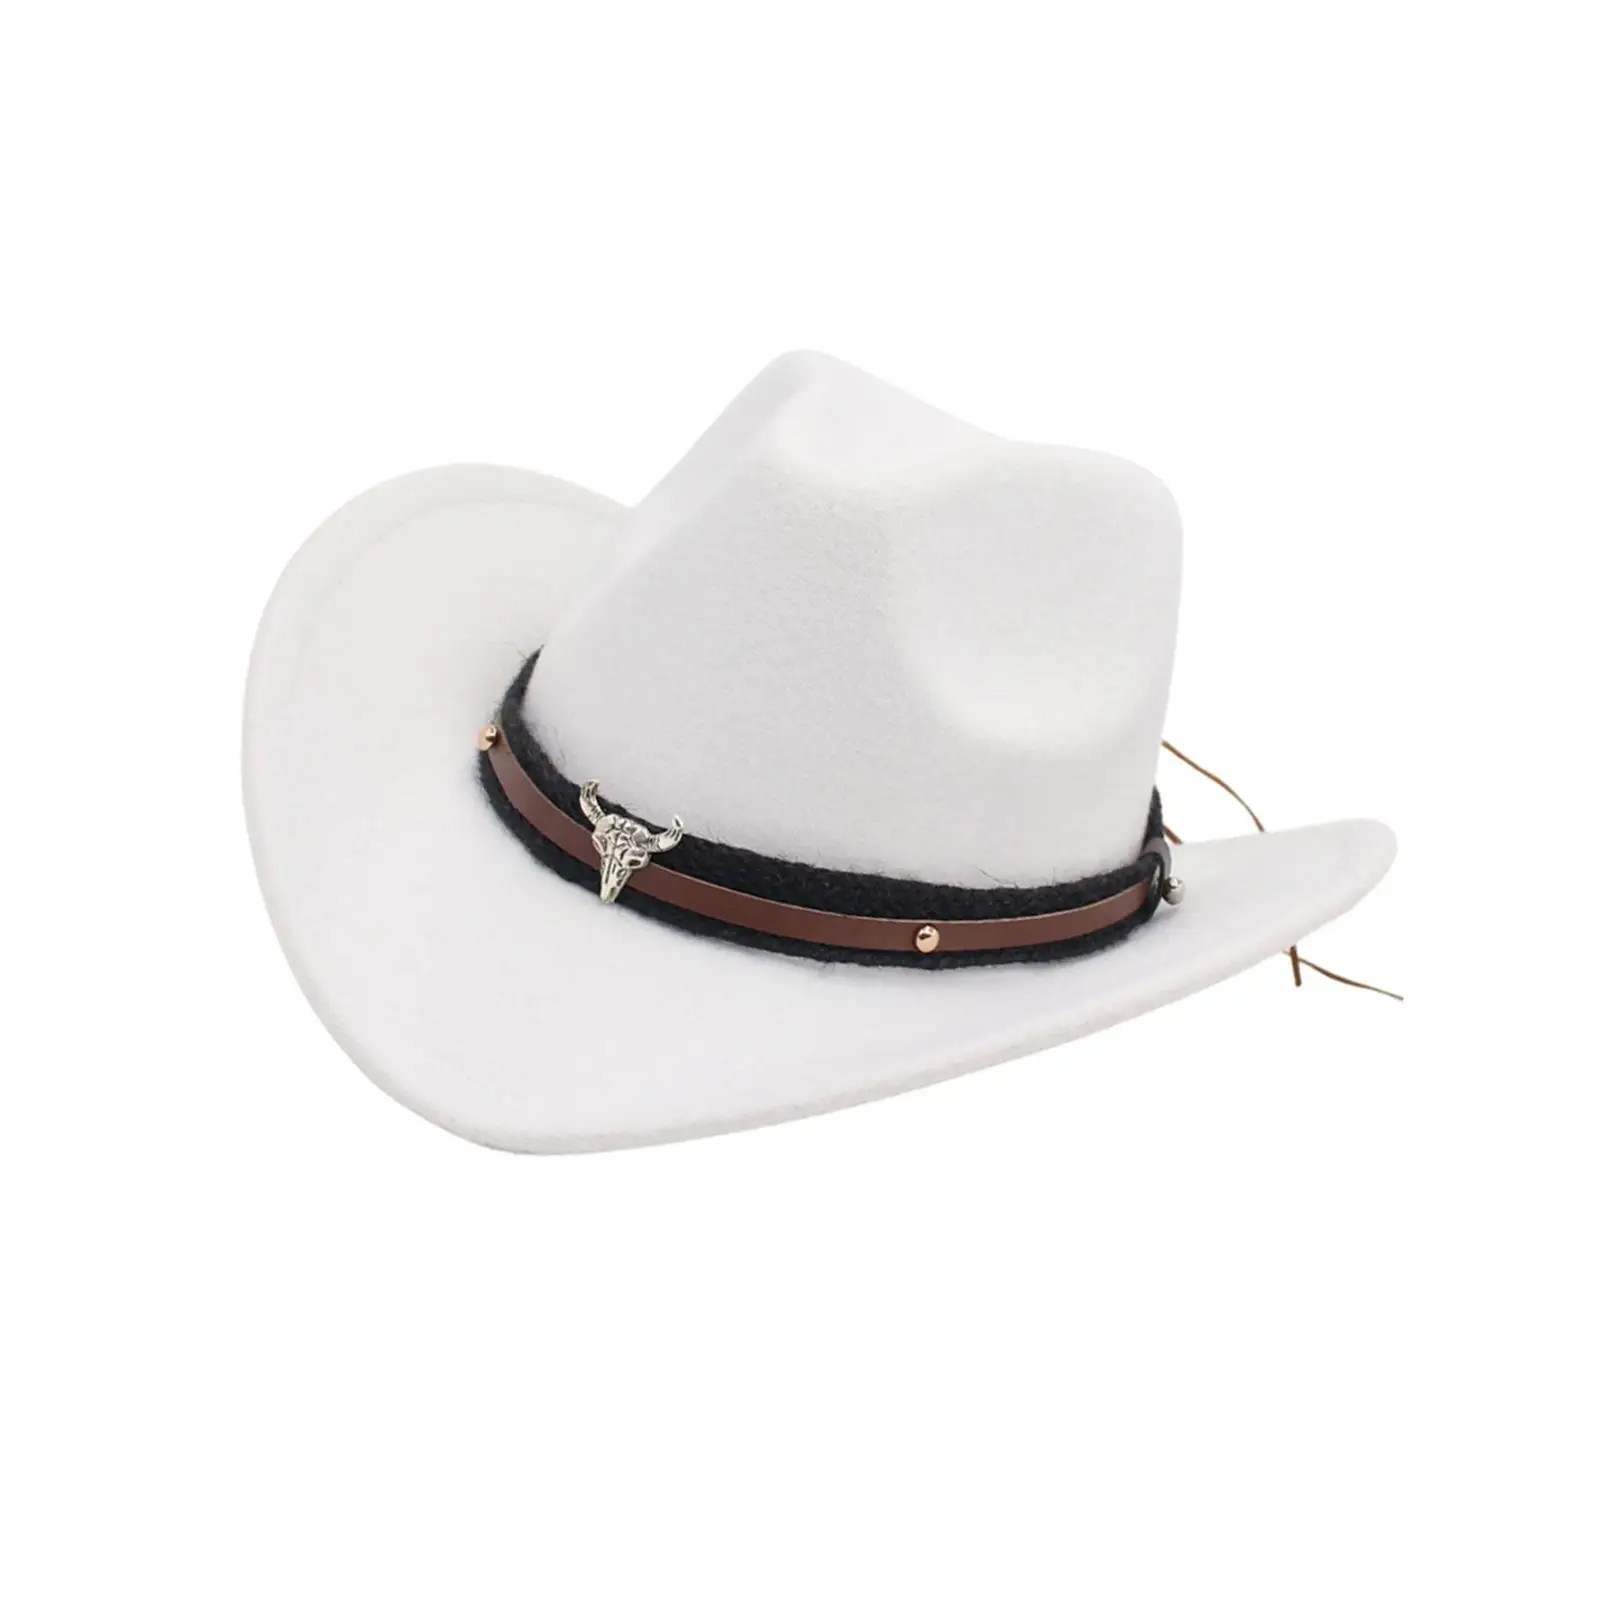 Western Cowboy Hat Casual Summer Sun Protection Hat for Unisex Fishing Rodeo